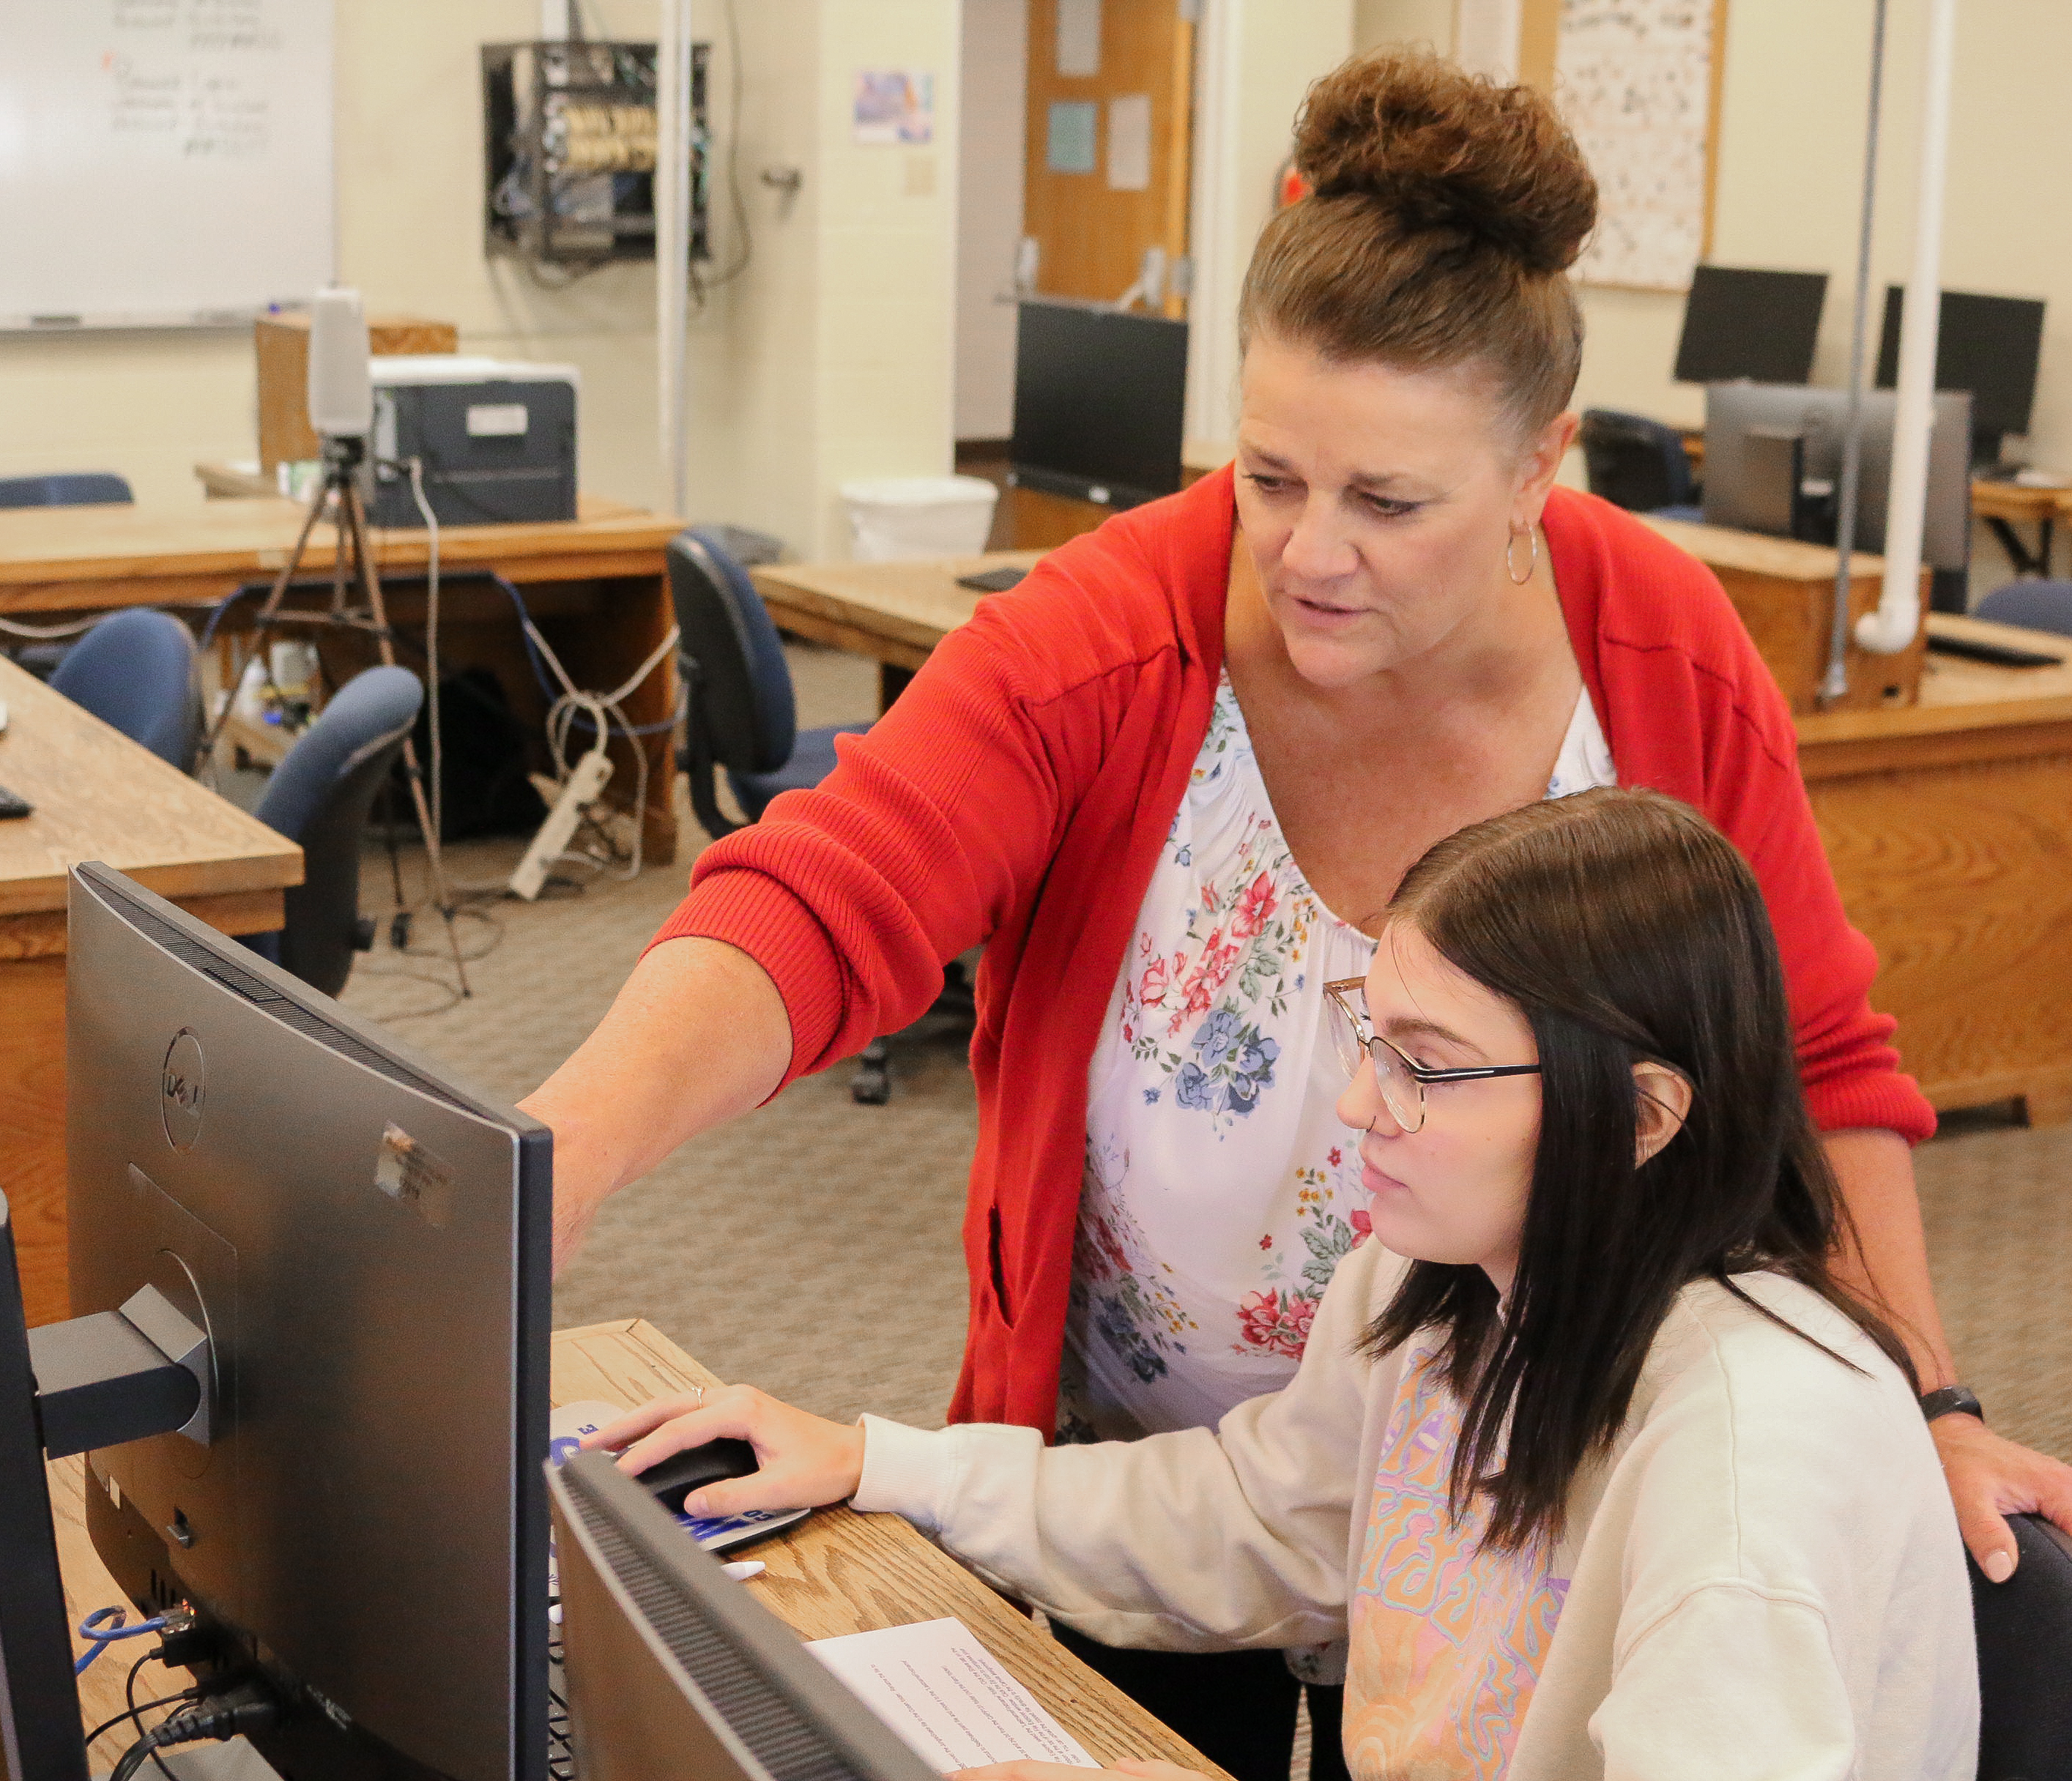 Adult helping student on computer